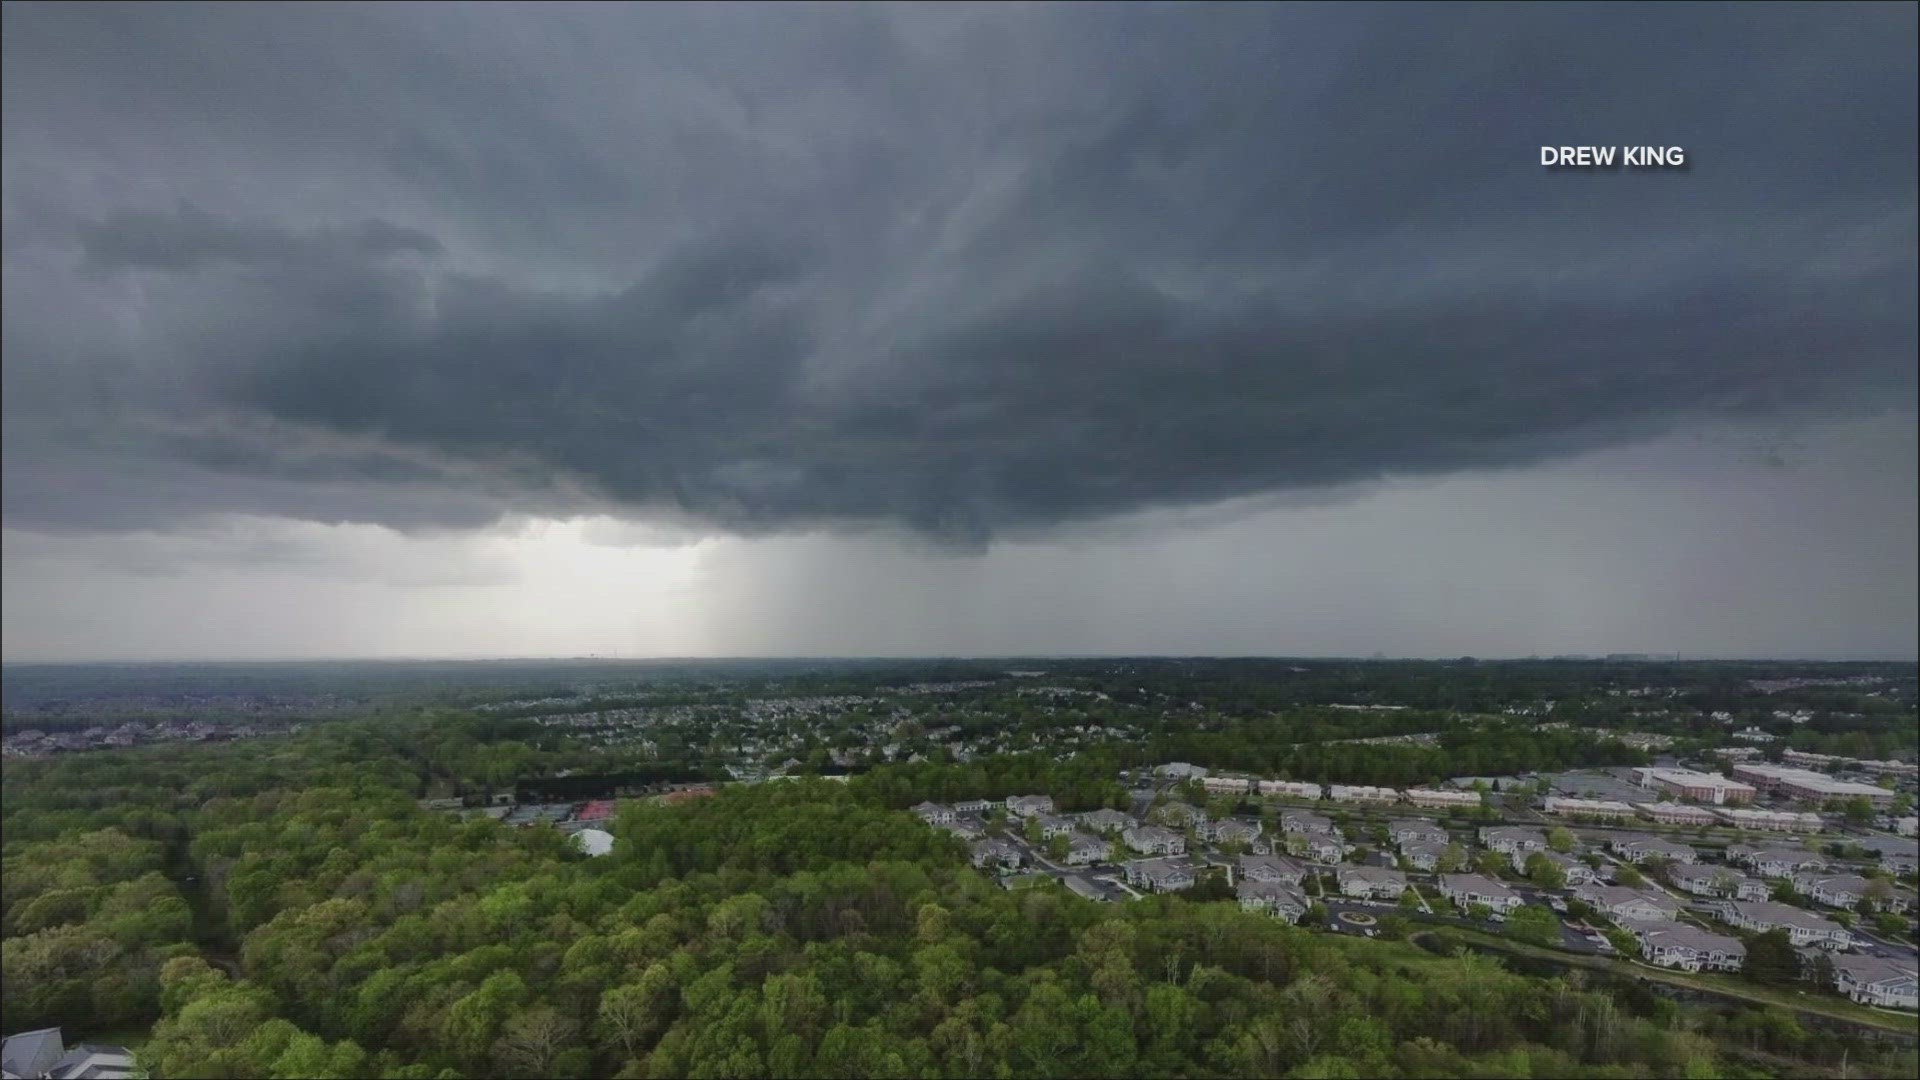 Eagle-eyed WCNC Charlotte viewers shared the moments captured on their phones during Thursday's storm.